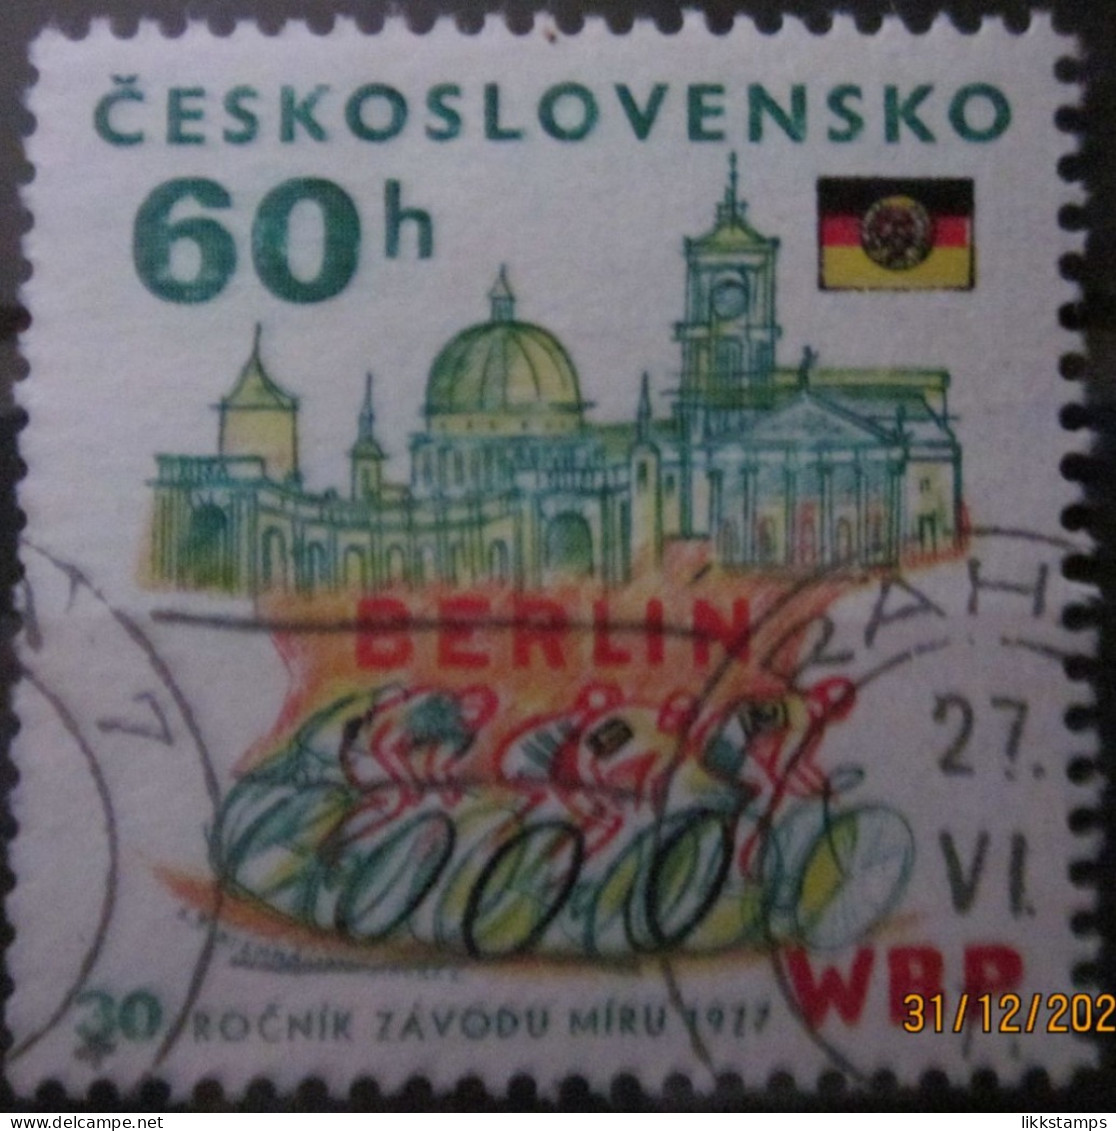 CZECHOSLOVAKIA 1977 ~ S.G. 2333, ~ THE 30th ANNIVERSARY OF THE PEACE CYCLE RACE. ~ VFU #03195 - Usados